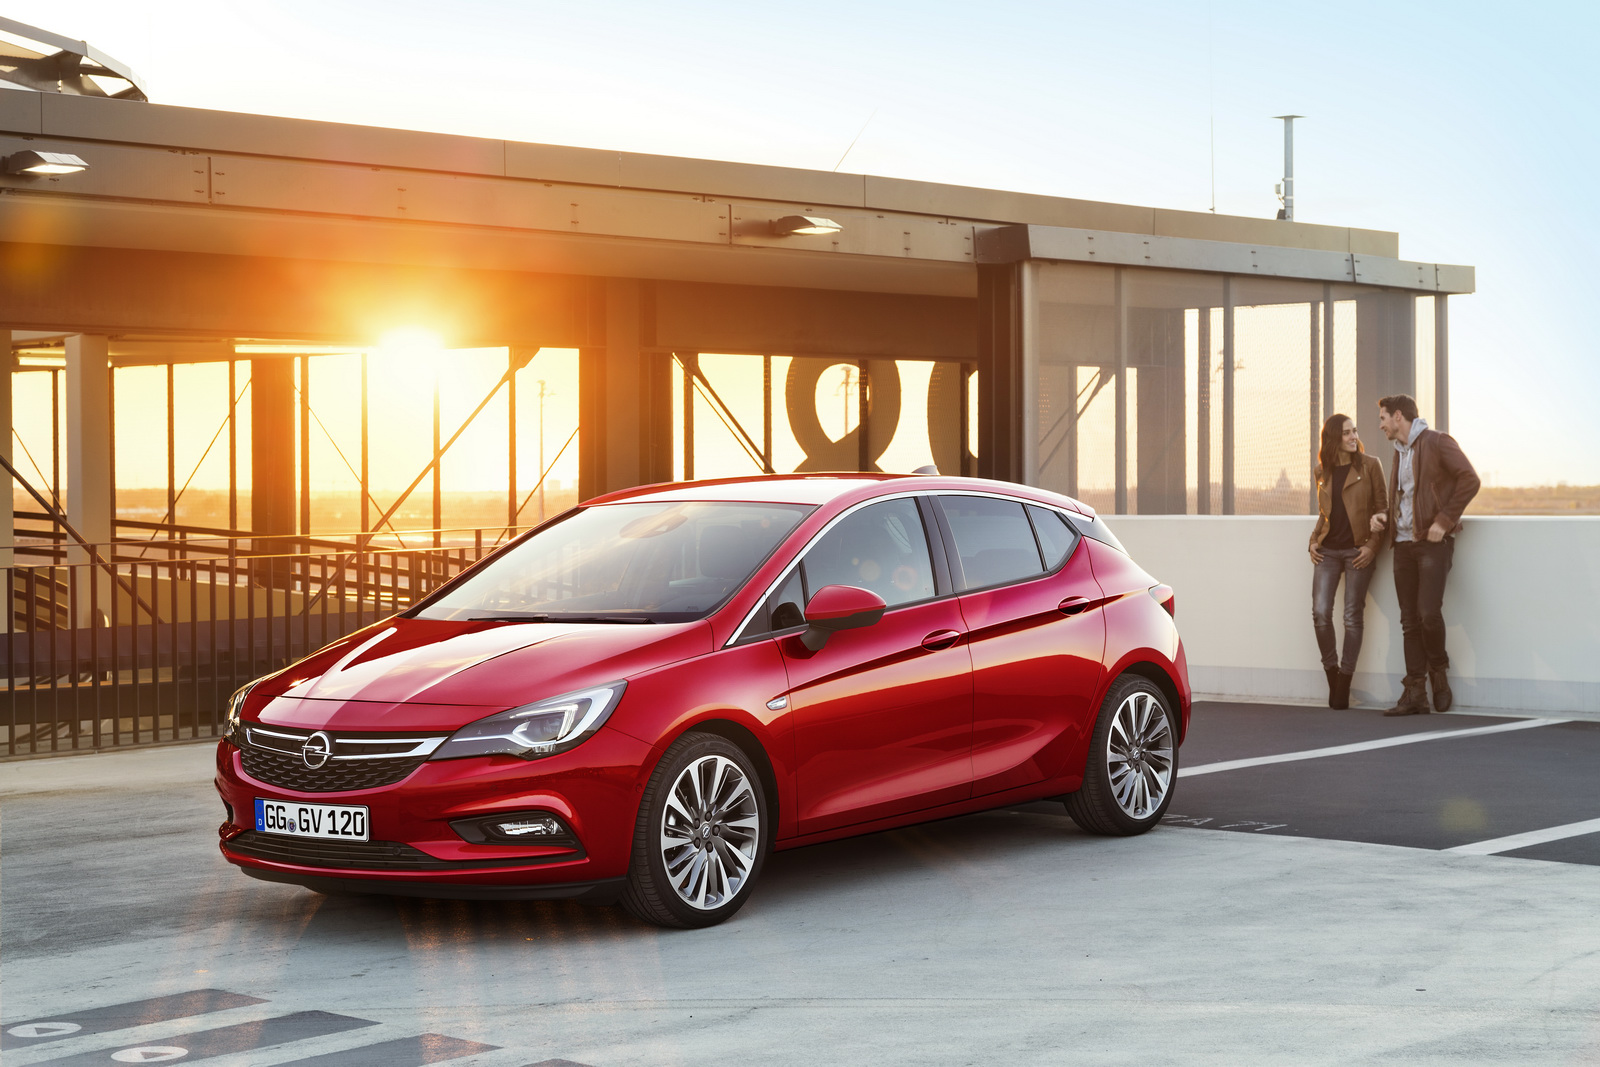 All-New Opel Astra Is Up To 200 Kg Lighter, Debuts 145PS 1.4L Turbo Petrol